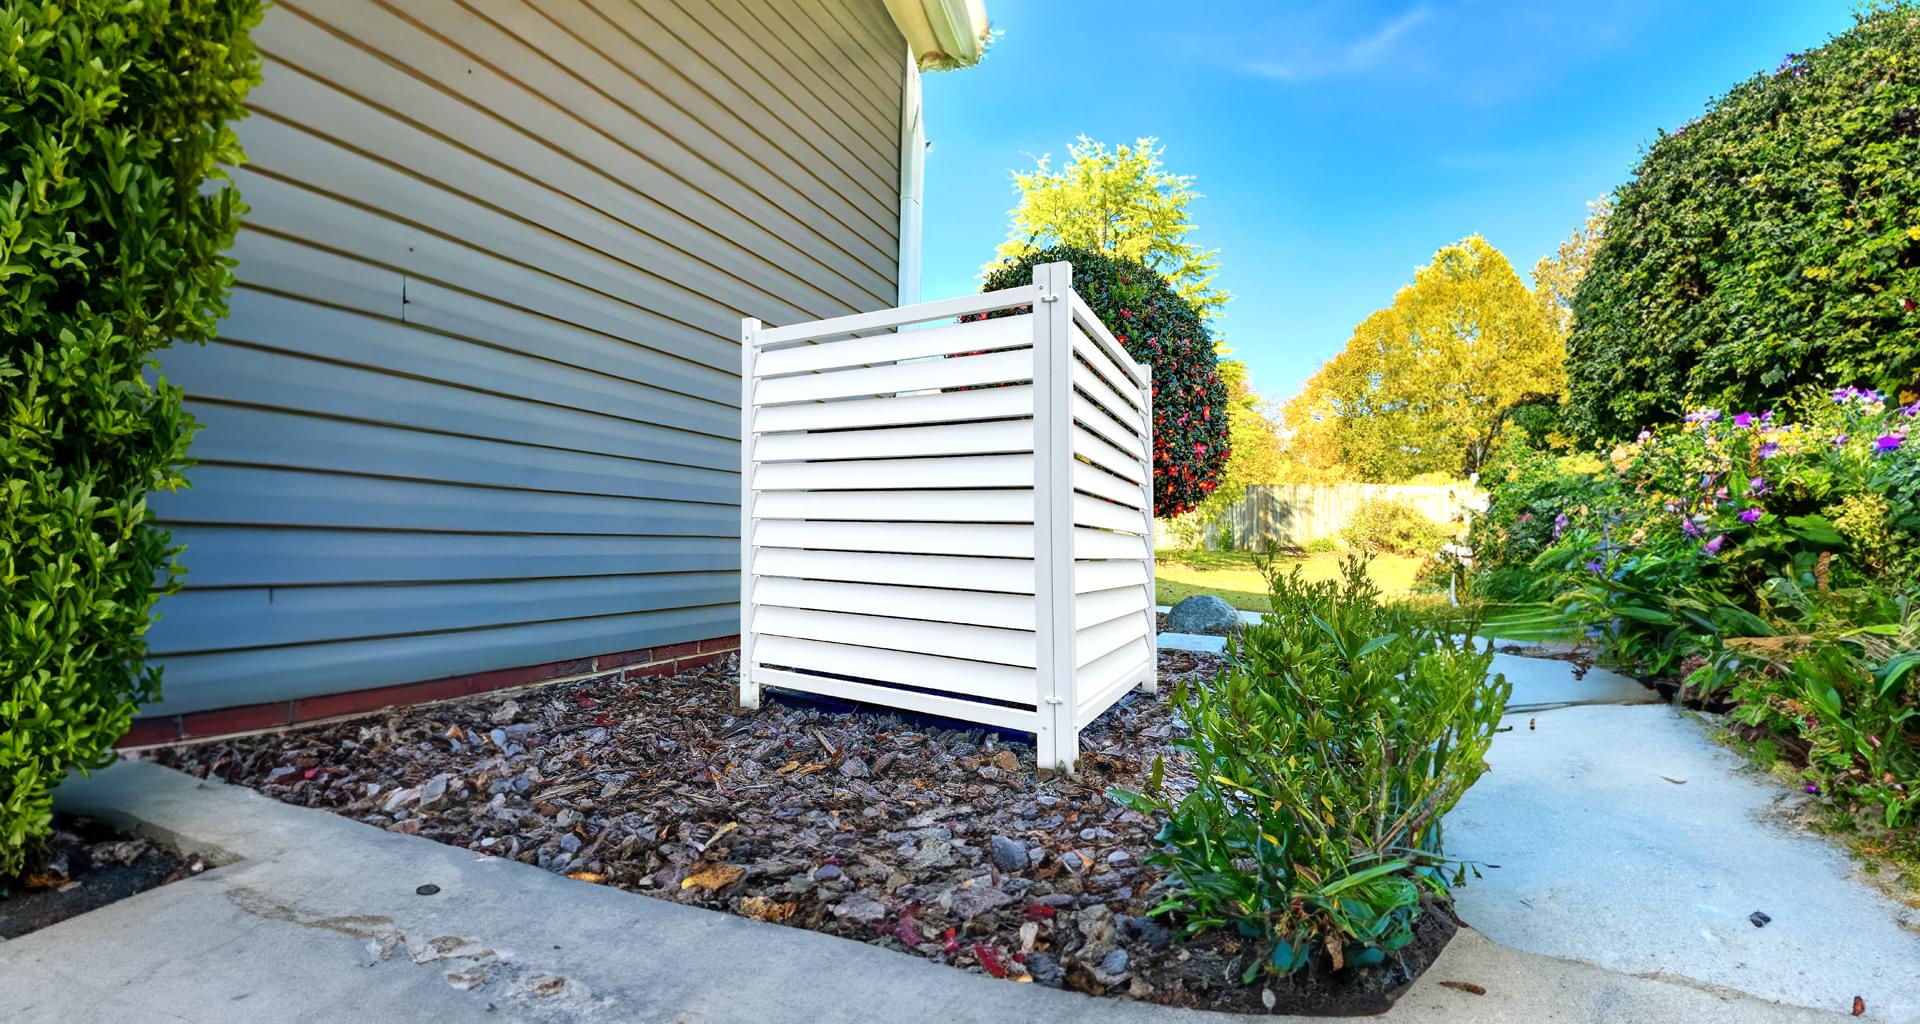 5 Ways to Hide Garbage Cans in Your Yard